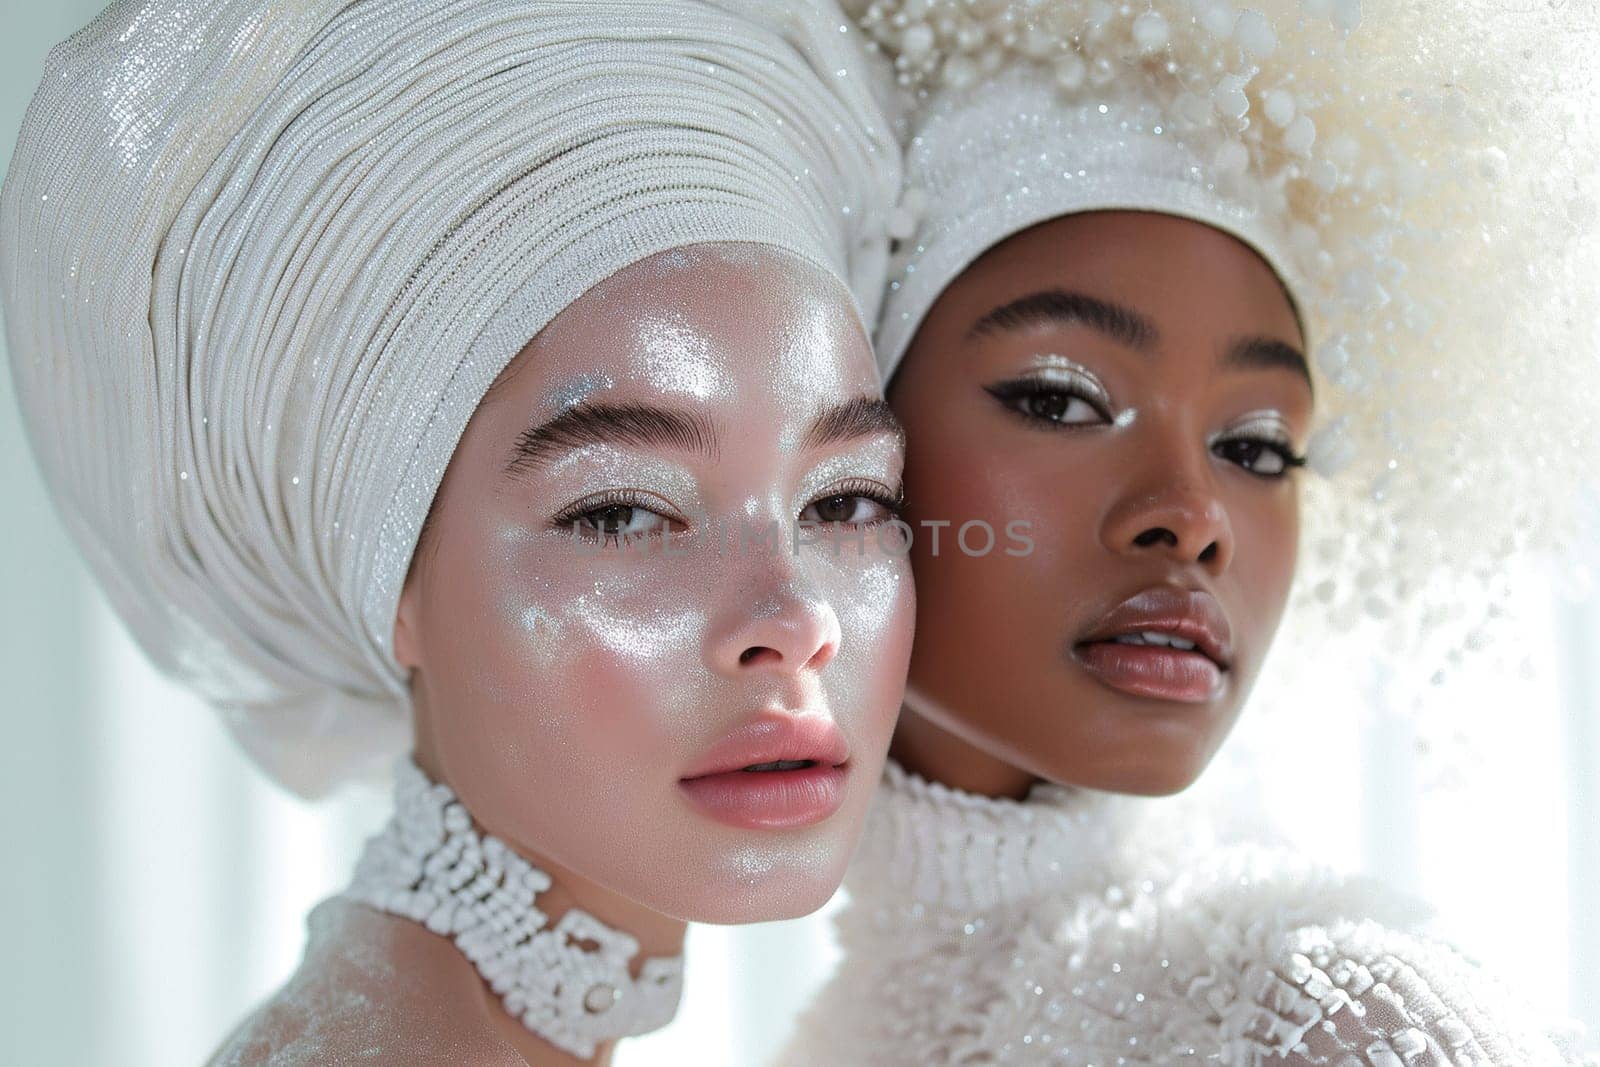 In a fashion shoot, two girls of different nationalities with elegant white turbans embody the beauty of variety and style. by Yurich32